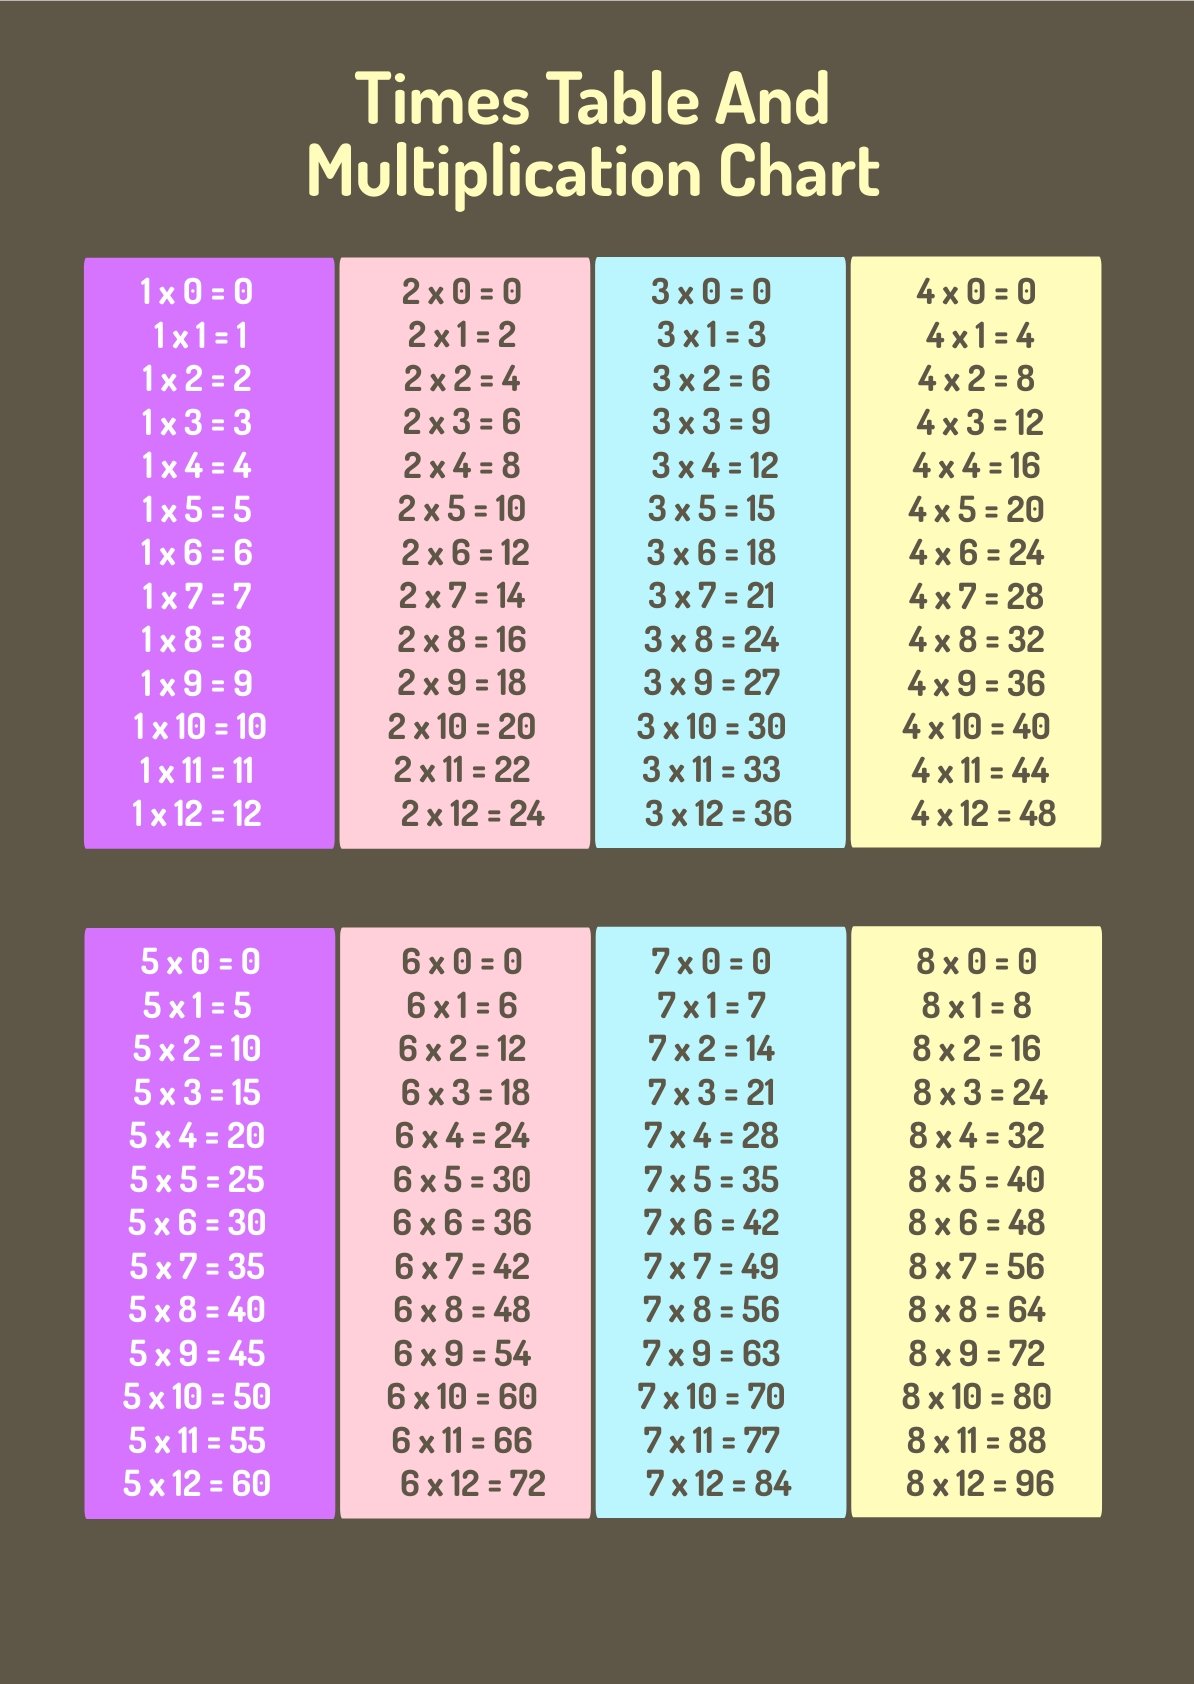 Times Table And Multiplication Chart